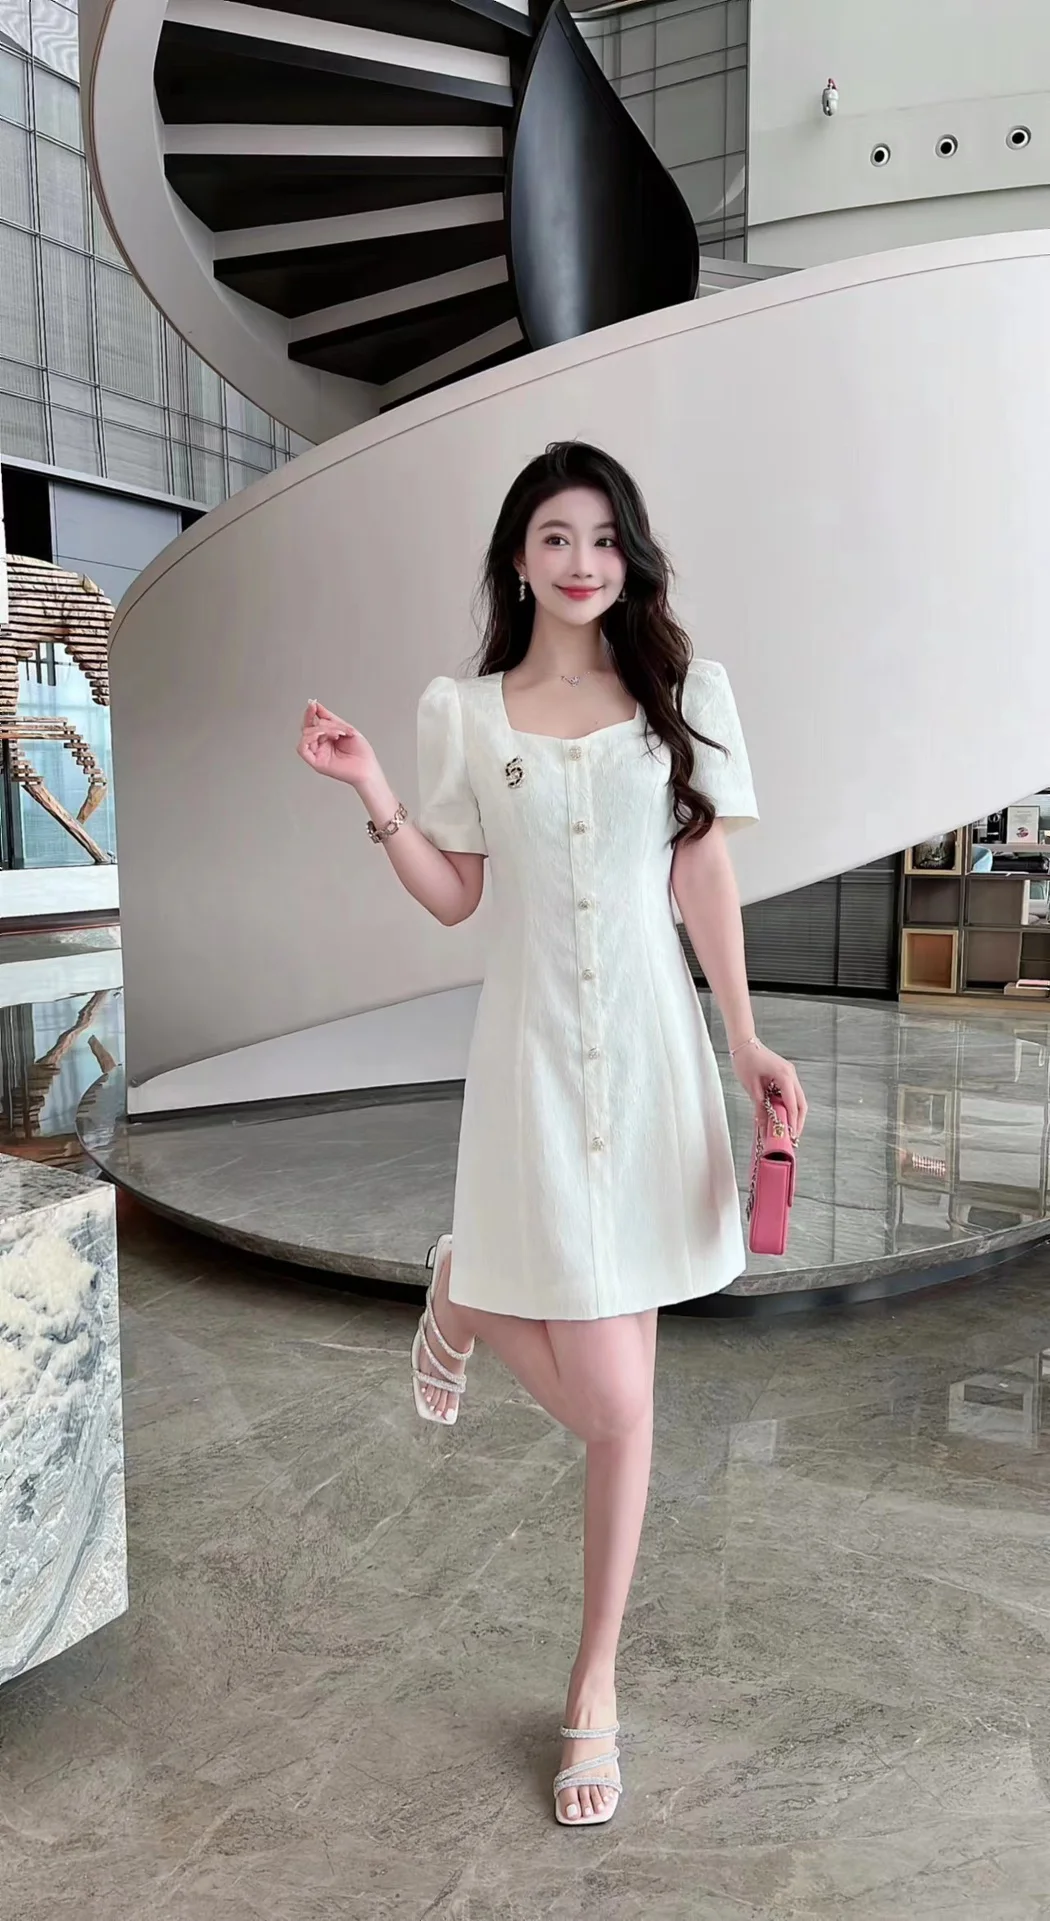 

2023 Spring/Summer Fashion New Women's Clothing Contrast Color Square Collar Dress 0704